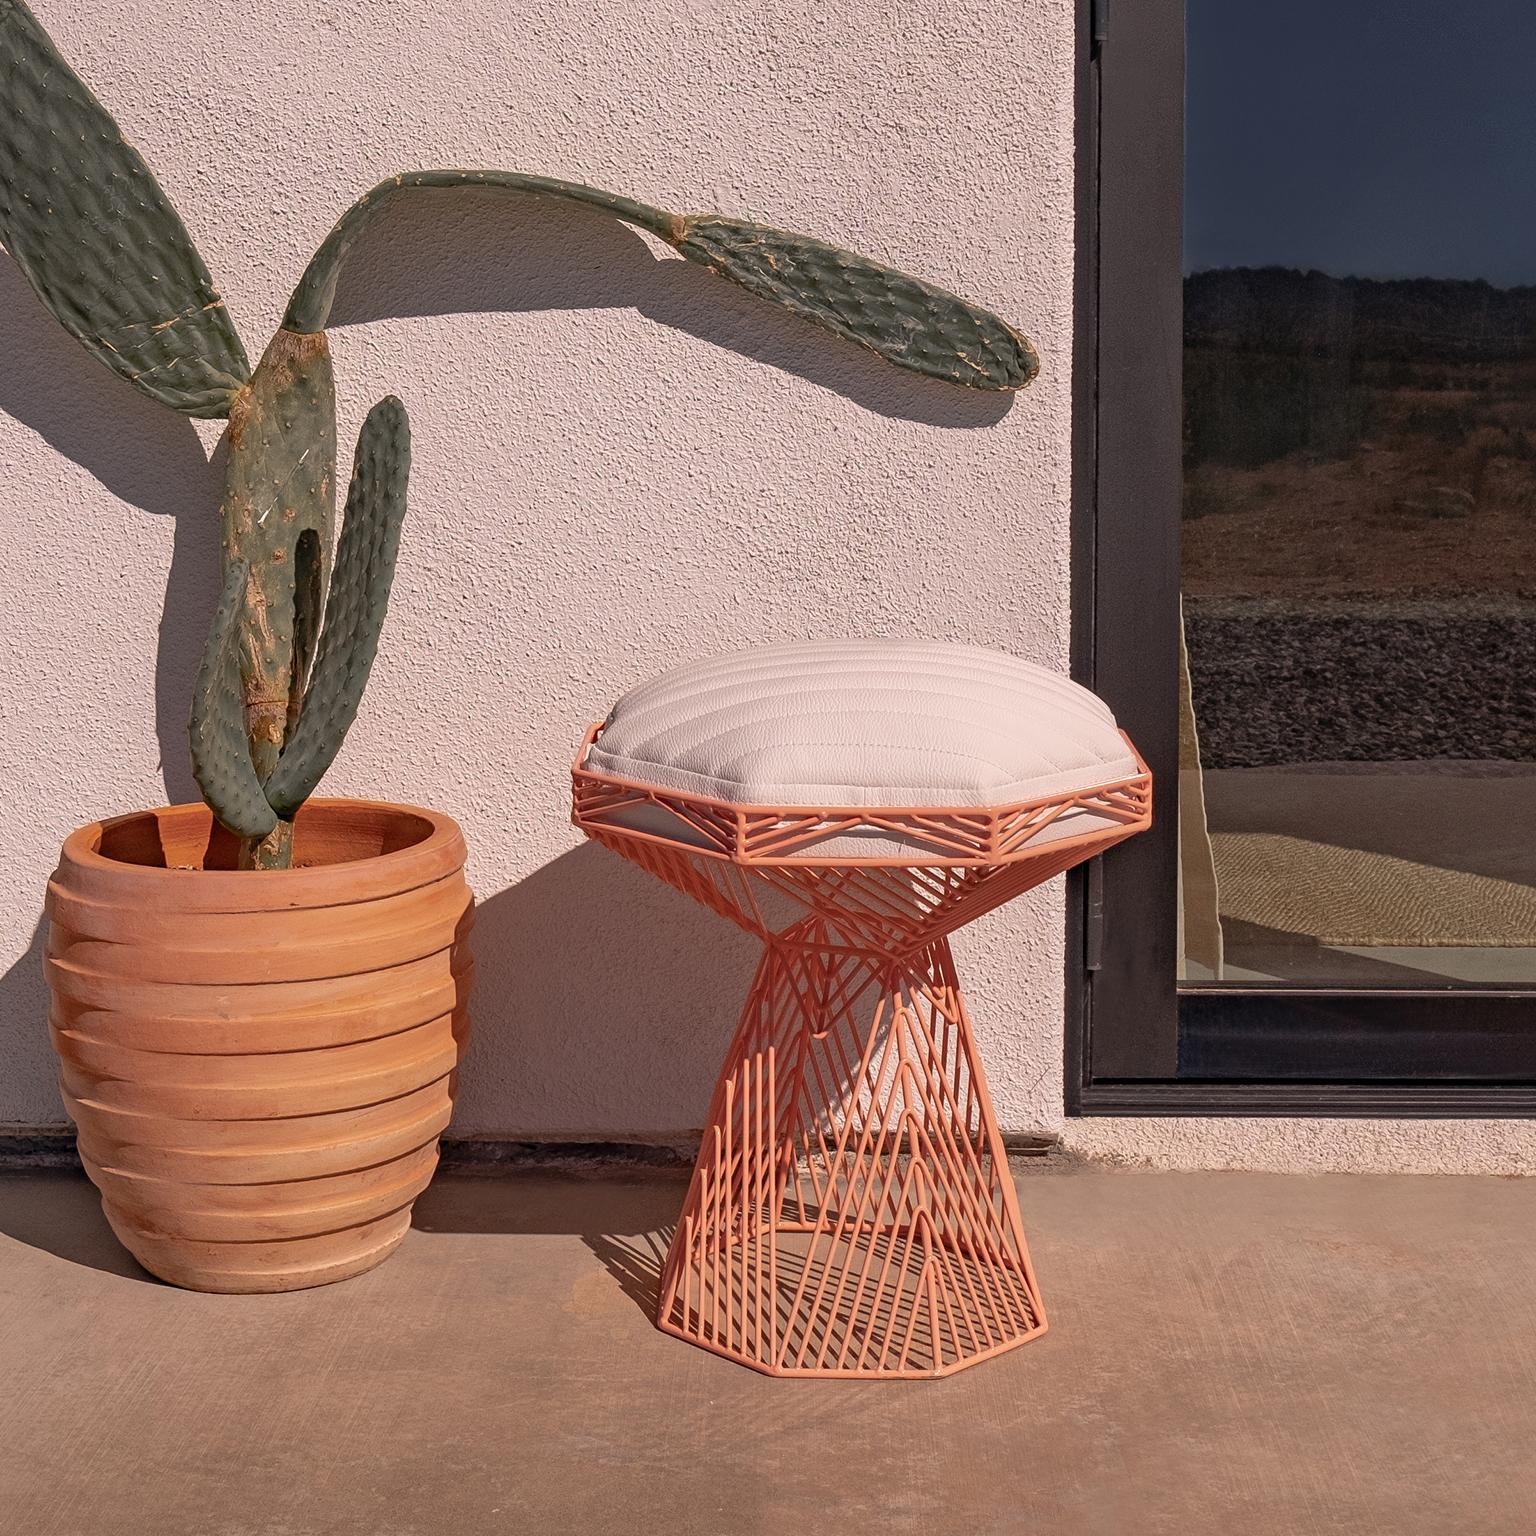 Contemporary Modern Wire Stool, in Peachy Pink with a Reversible White Leather Top